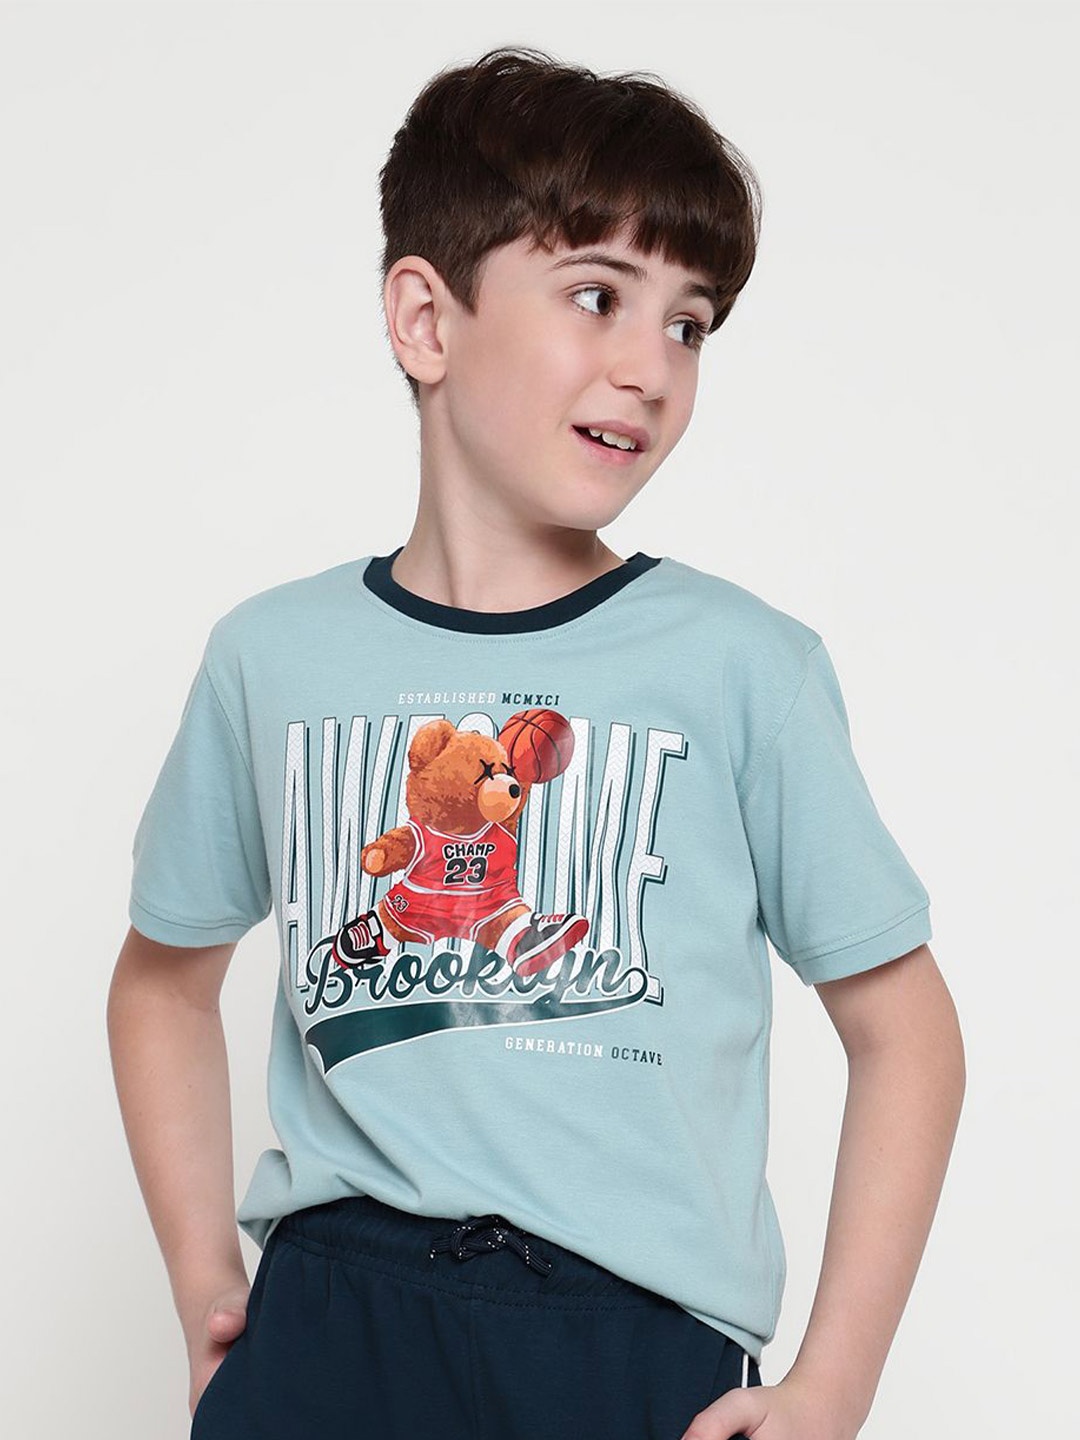 

Octave Boys Graphic Printed Round Neck T-shirt, Blue